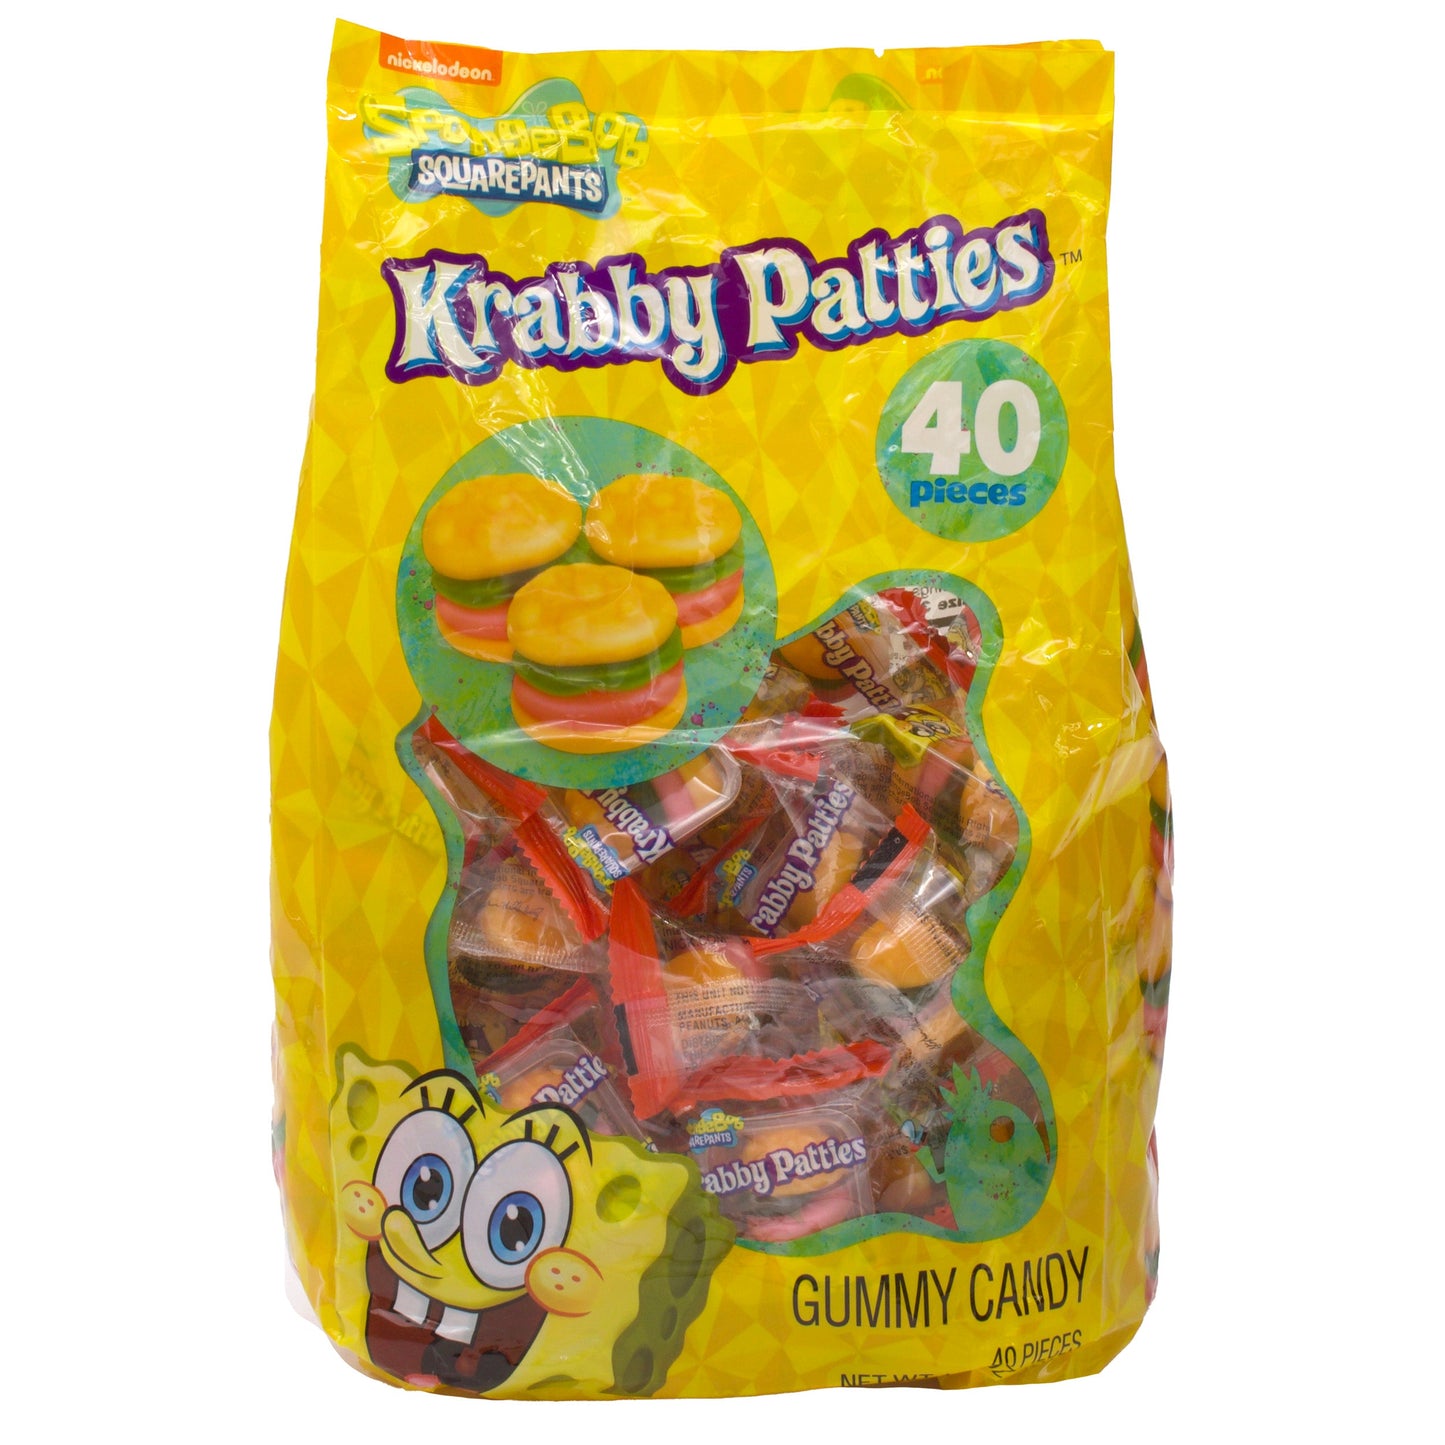 Yellow bag with 40 individually wrapped krabby patties burgers gummies